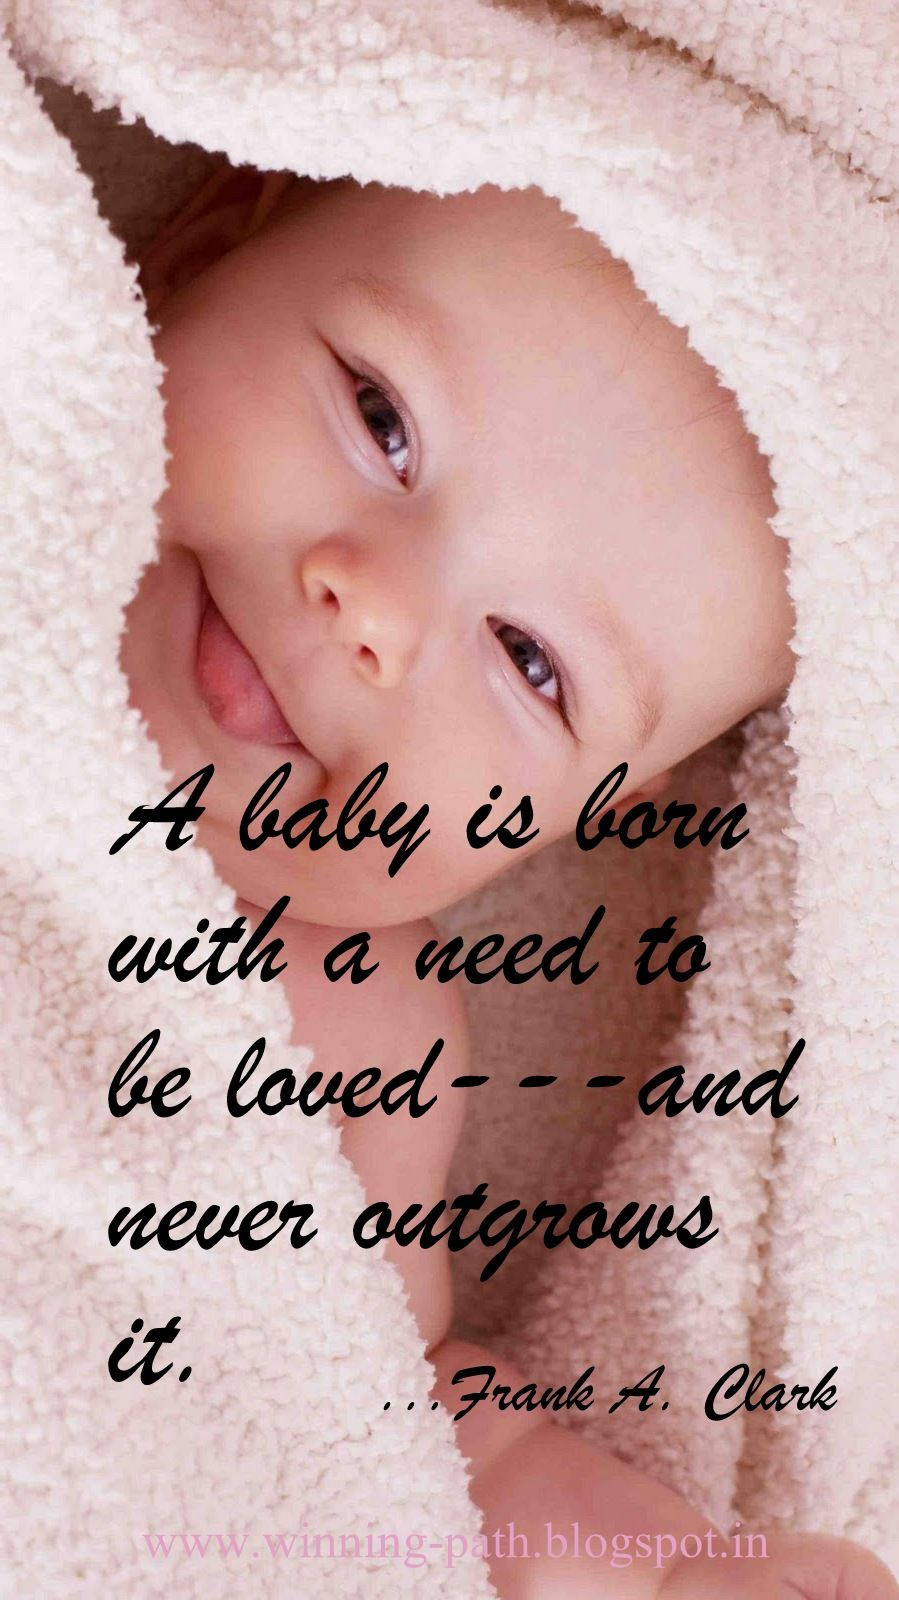 Baby Born Quote
 A baby is born with a need to be loved and never